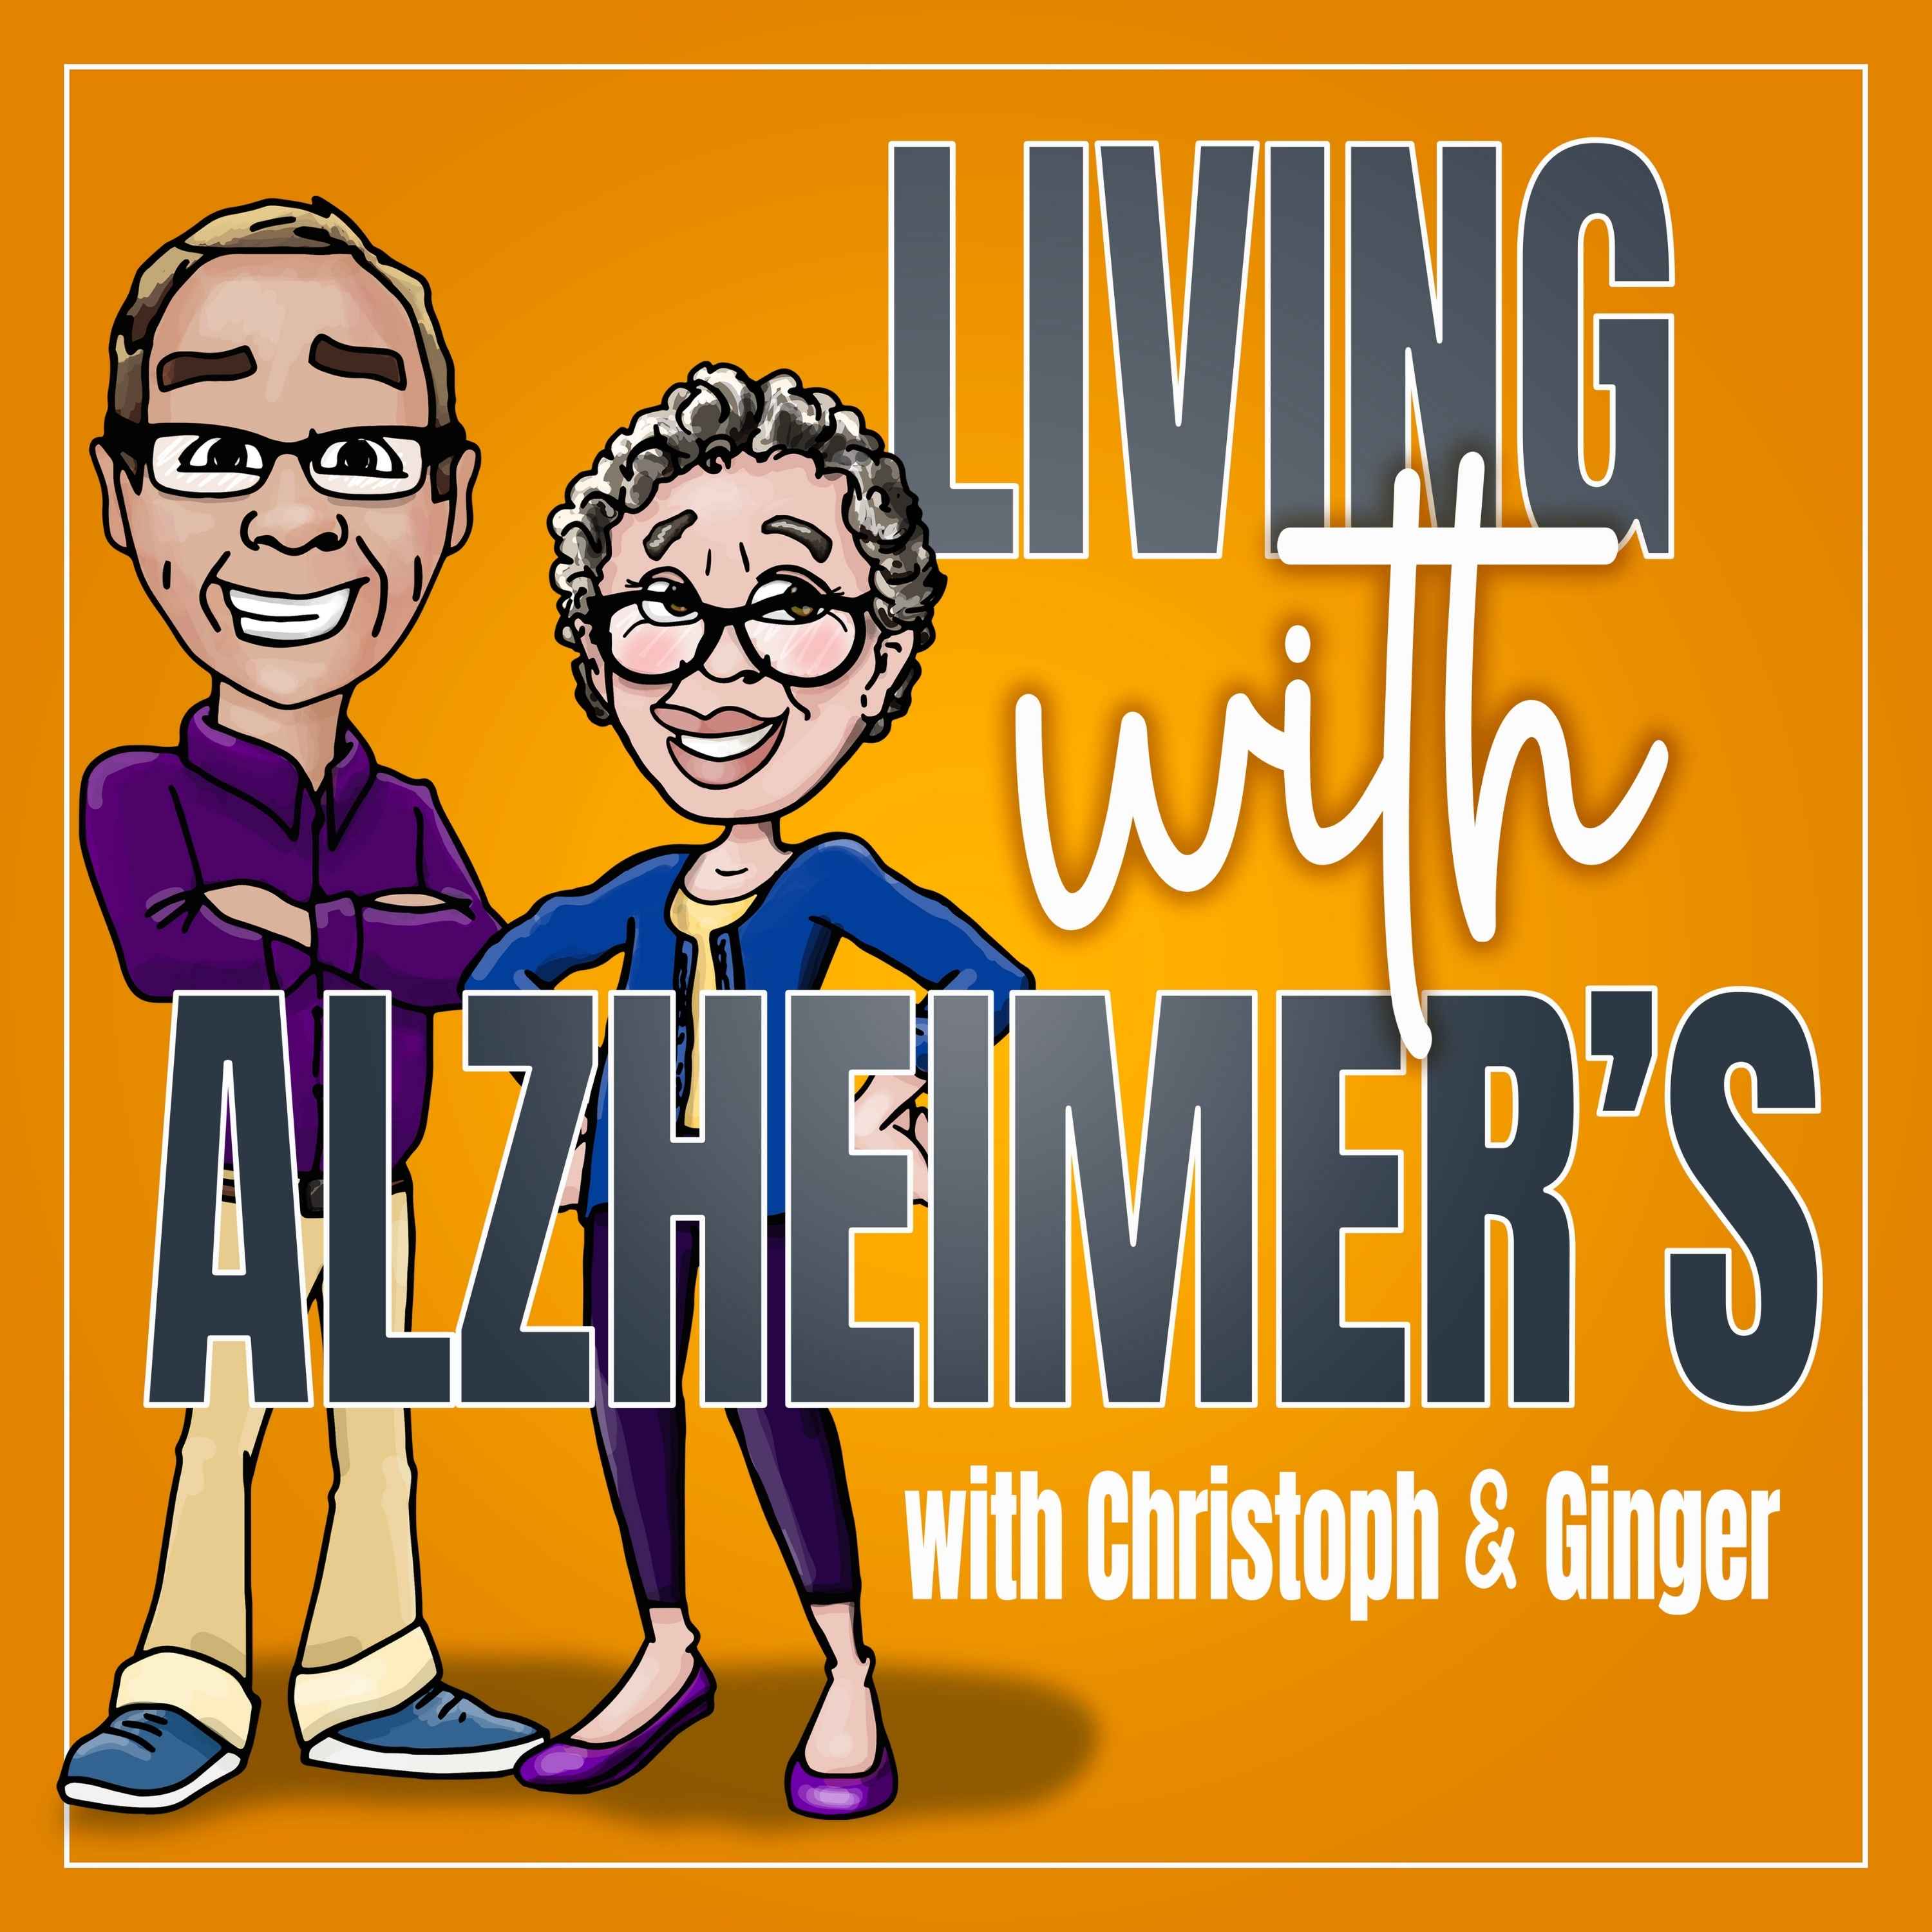 Alzheimer's Association Helpline resources and Ginger has a birthday!